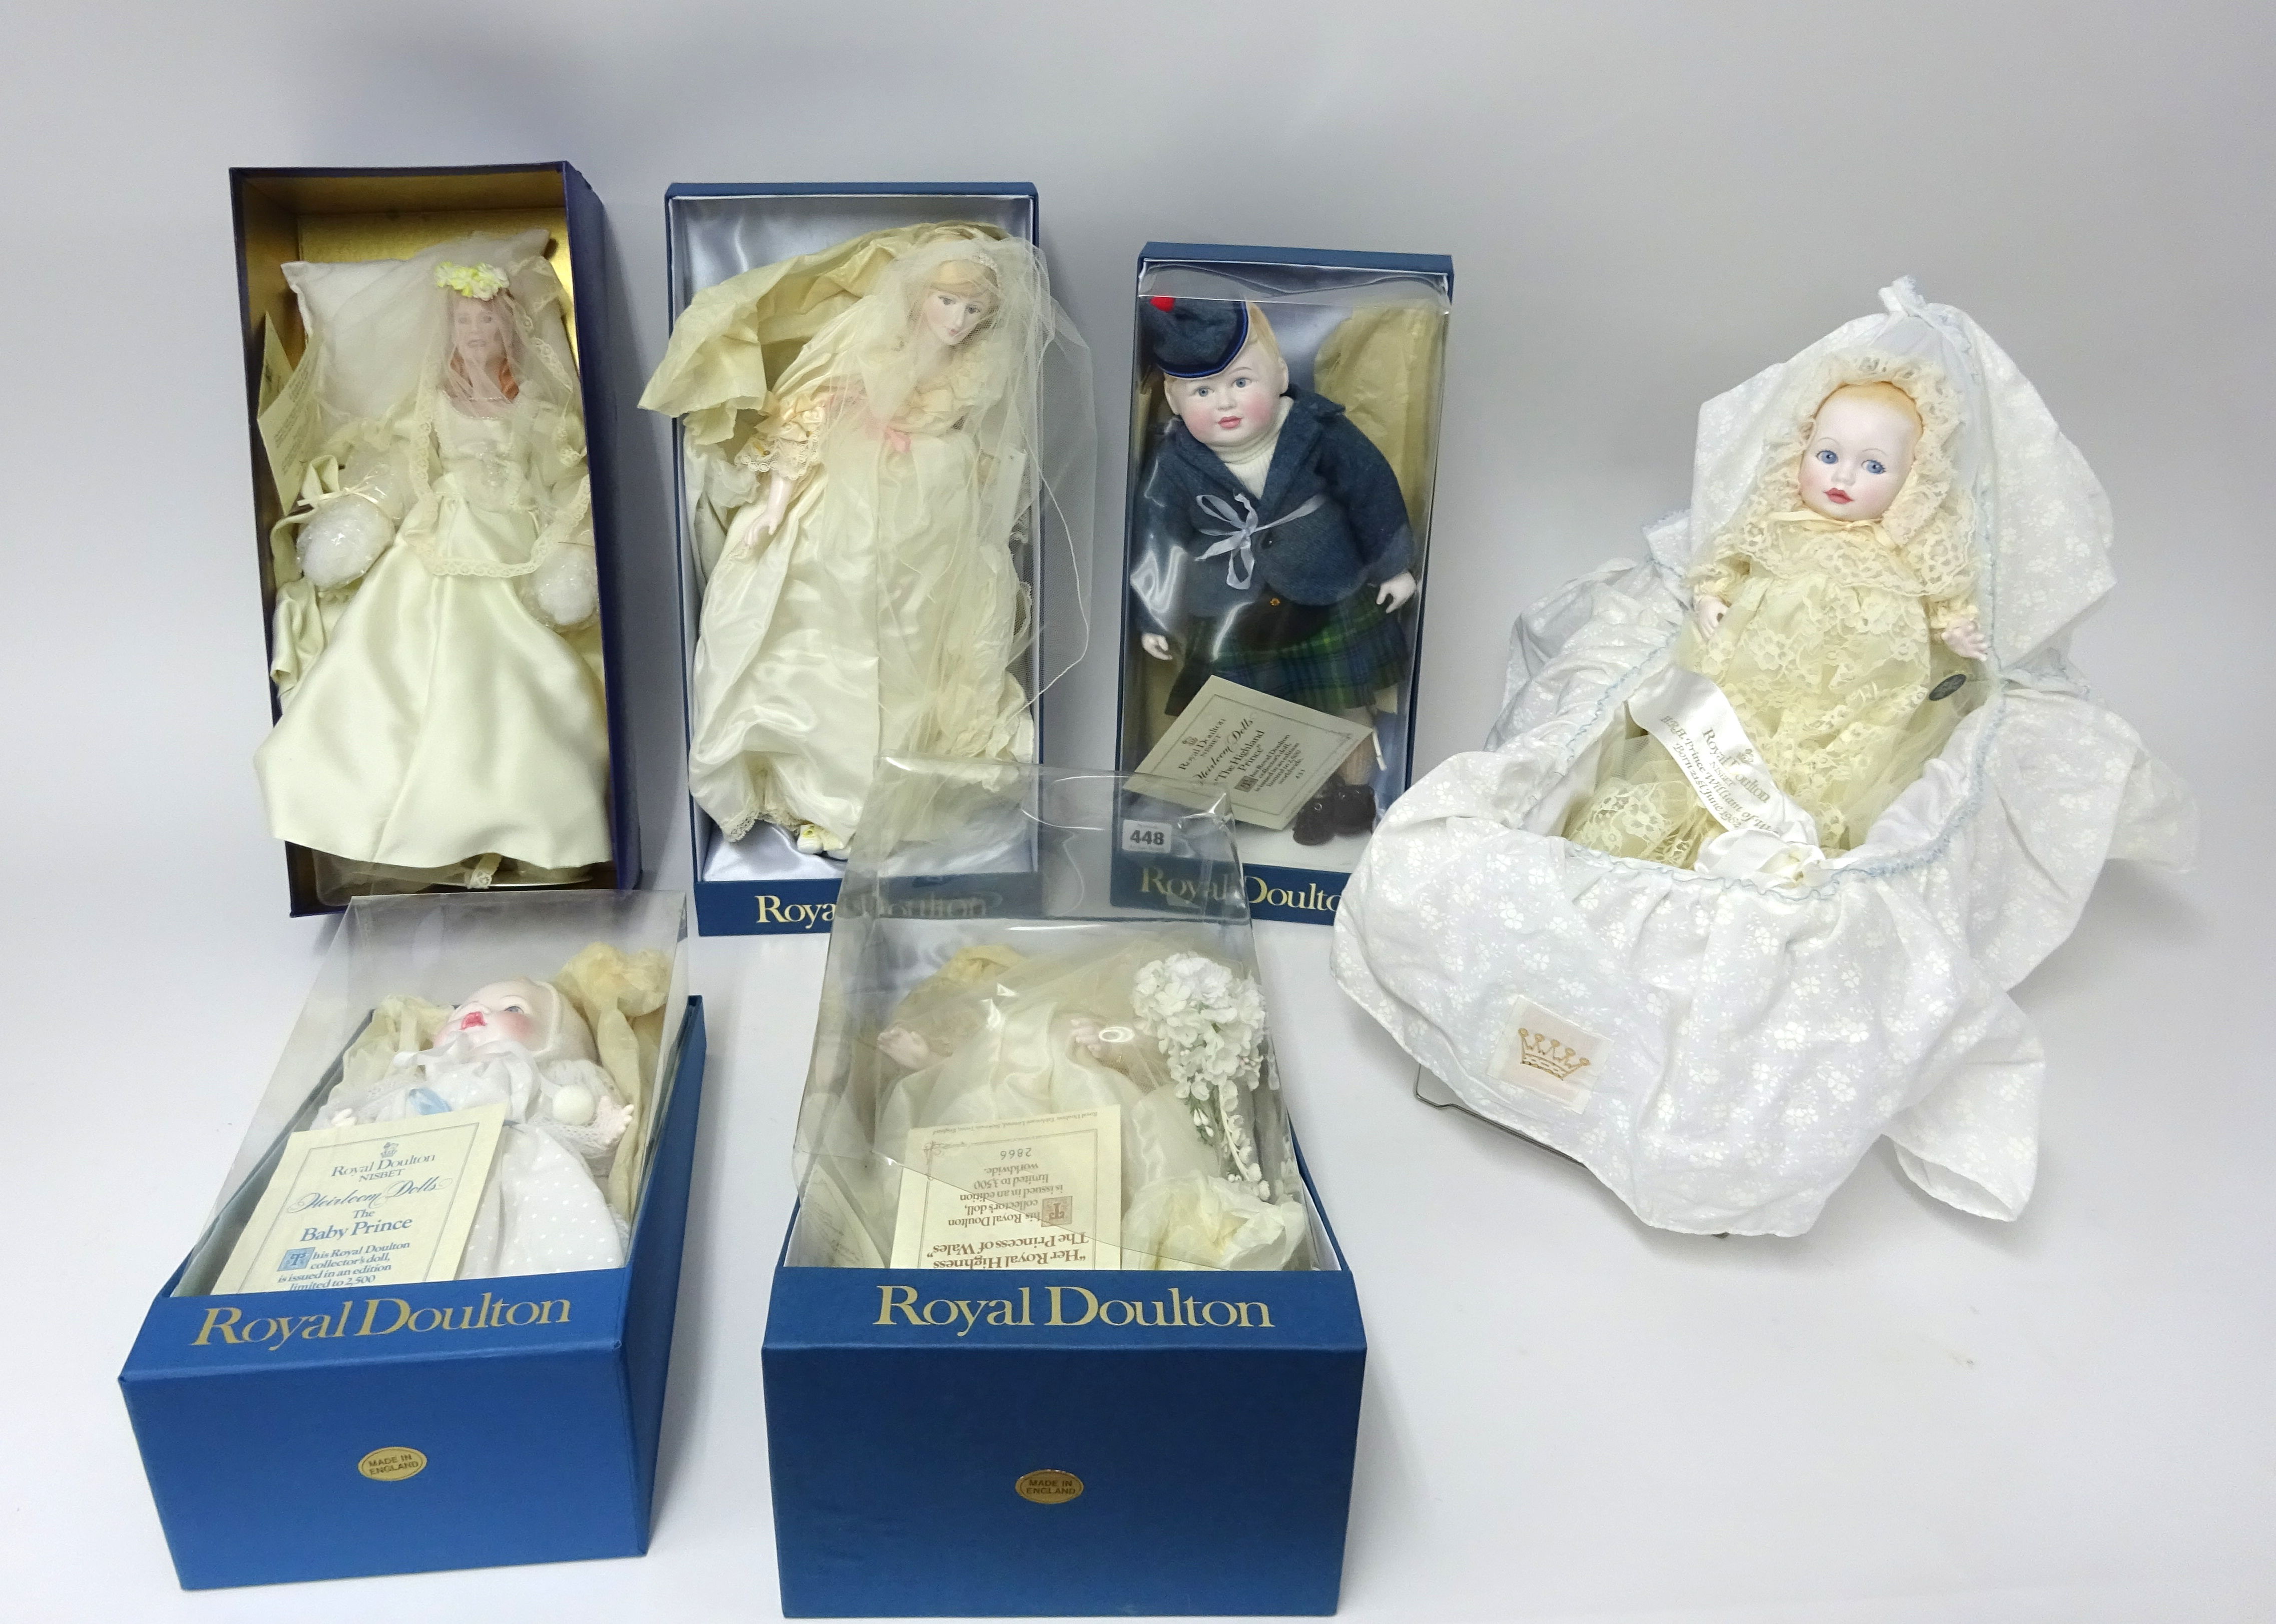 Royal Doulton a collection of Royal Dolls